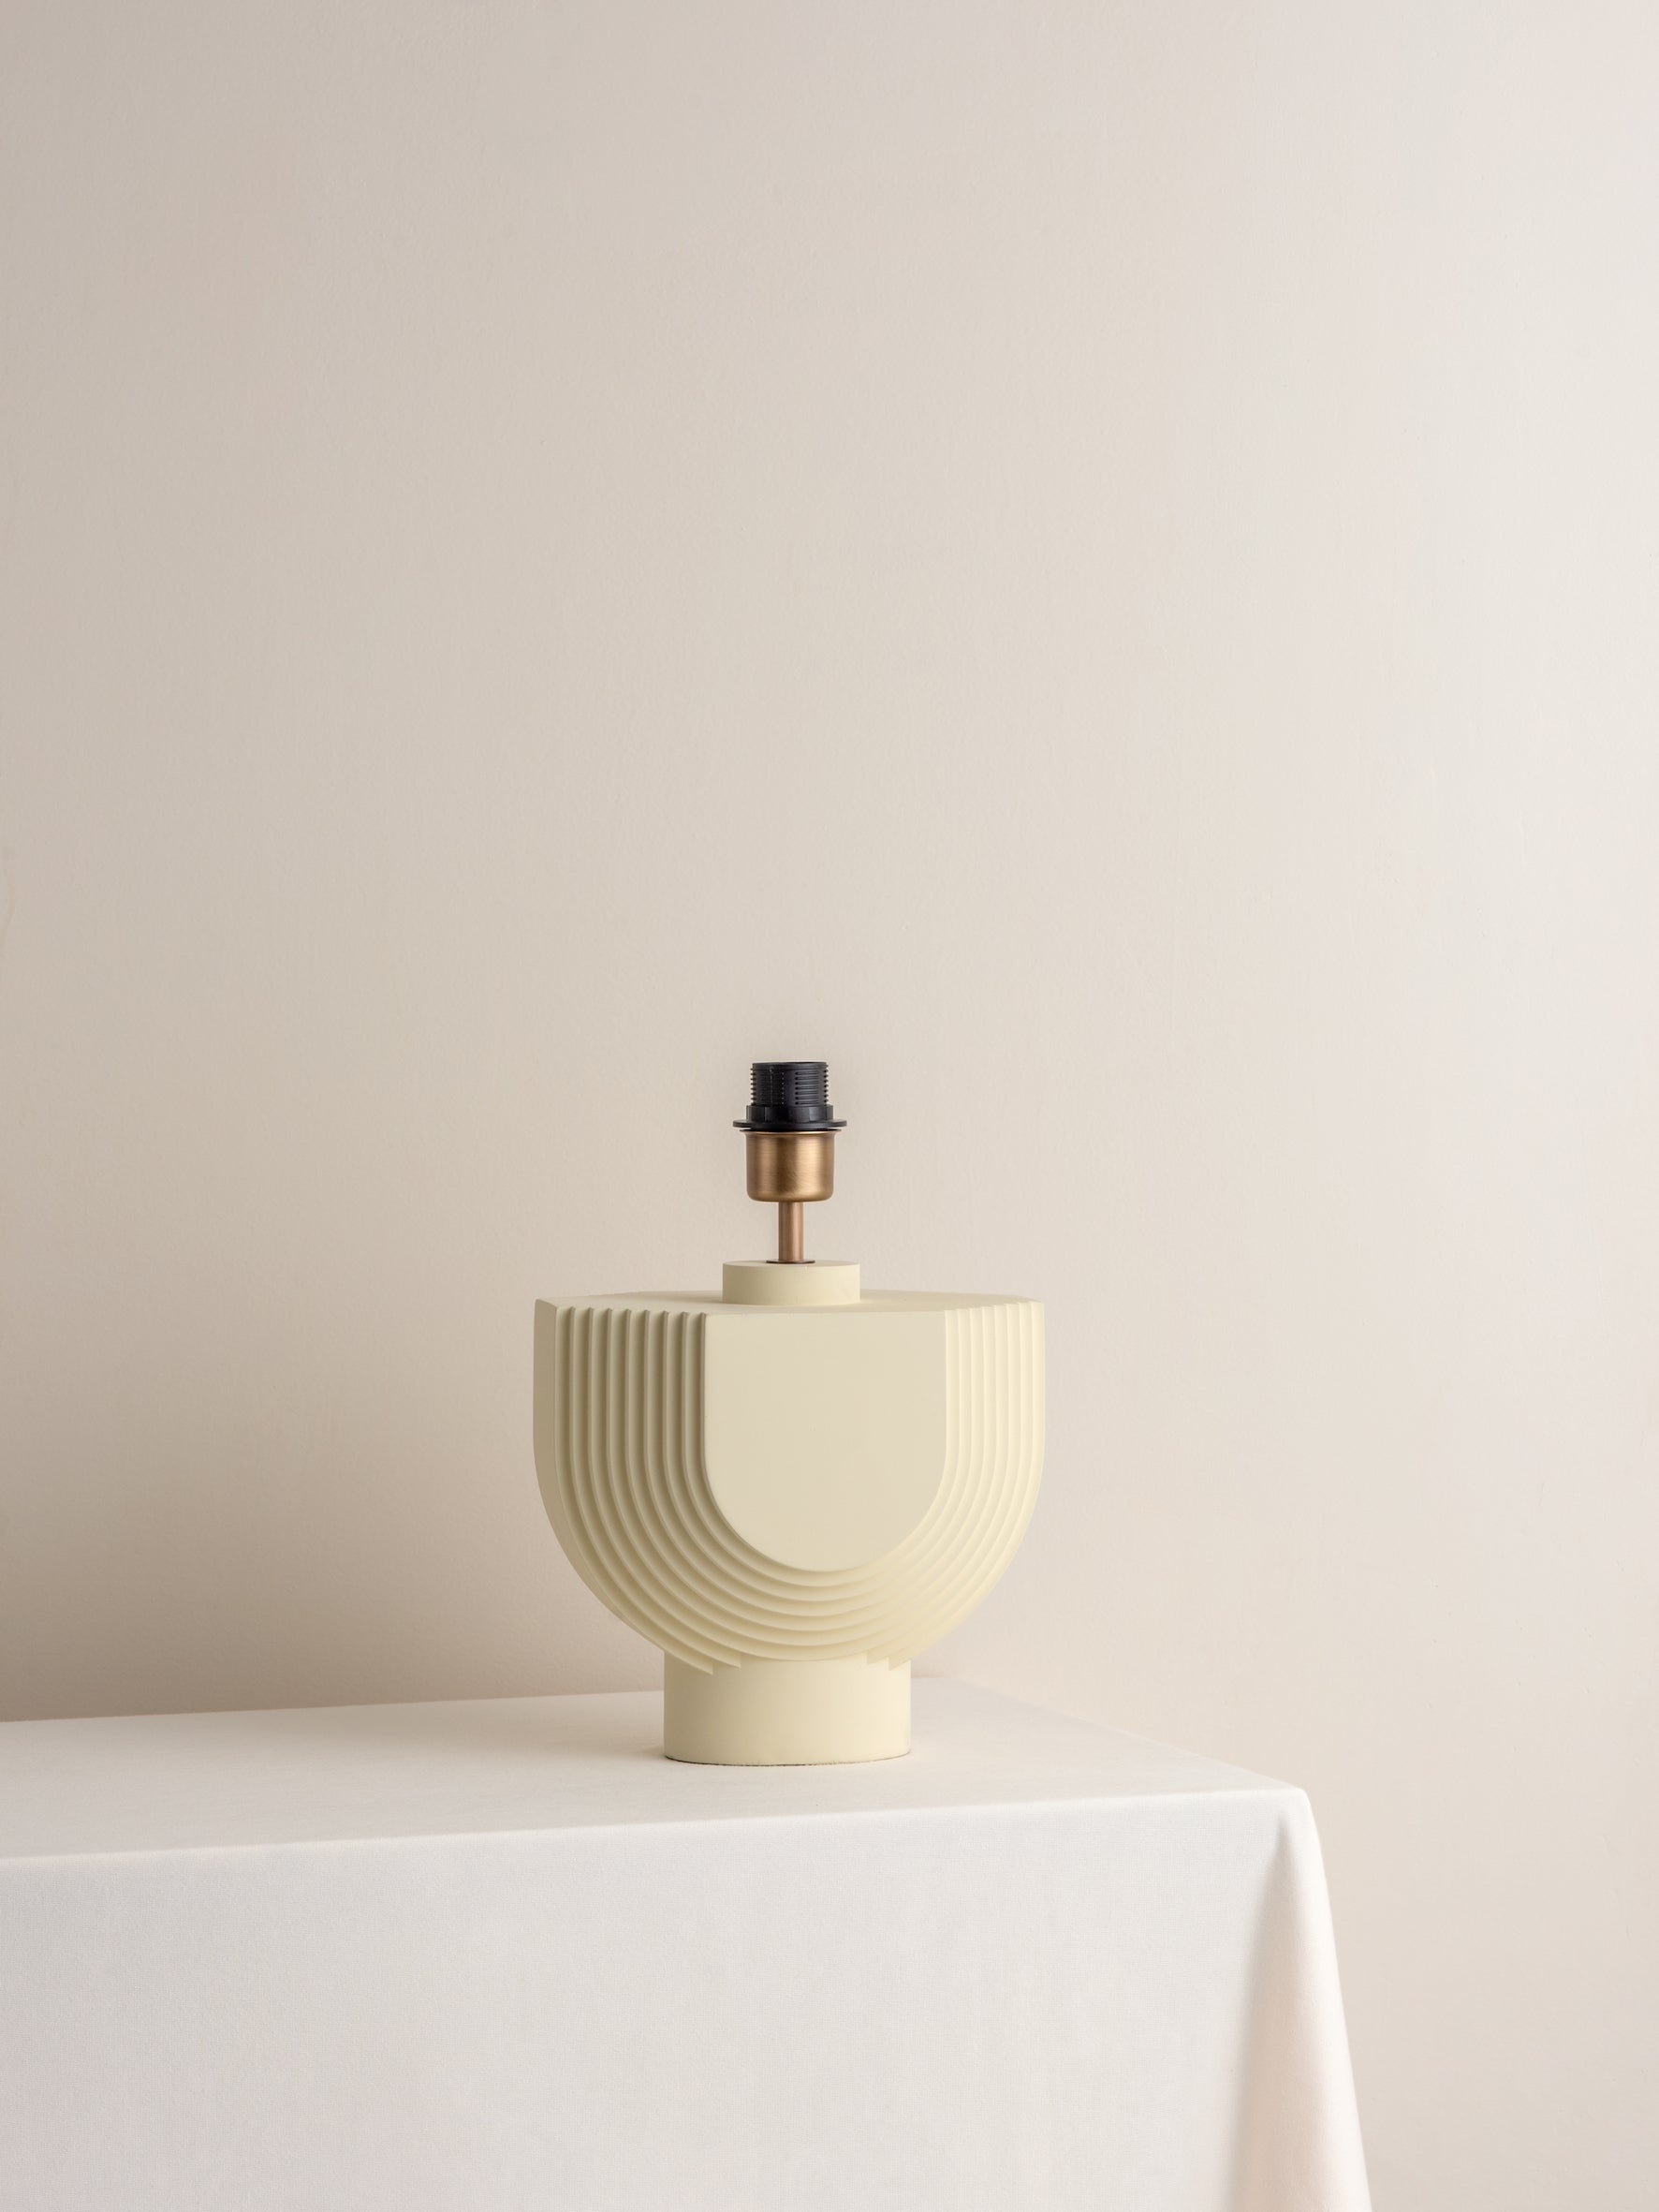 Editions concrete lamp with + bronze shade | Table Lamp | Lights & Lamps | UK | Modern Affordable Designer Lighting